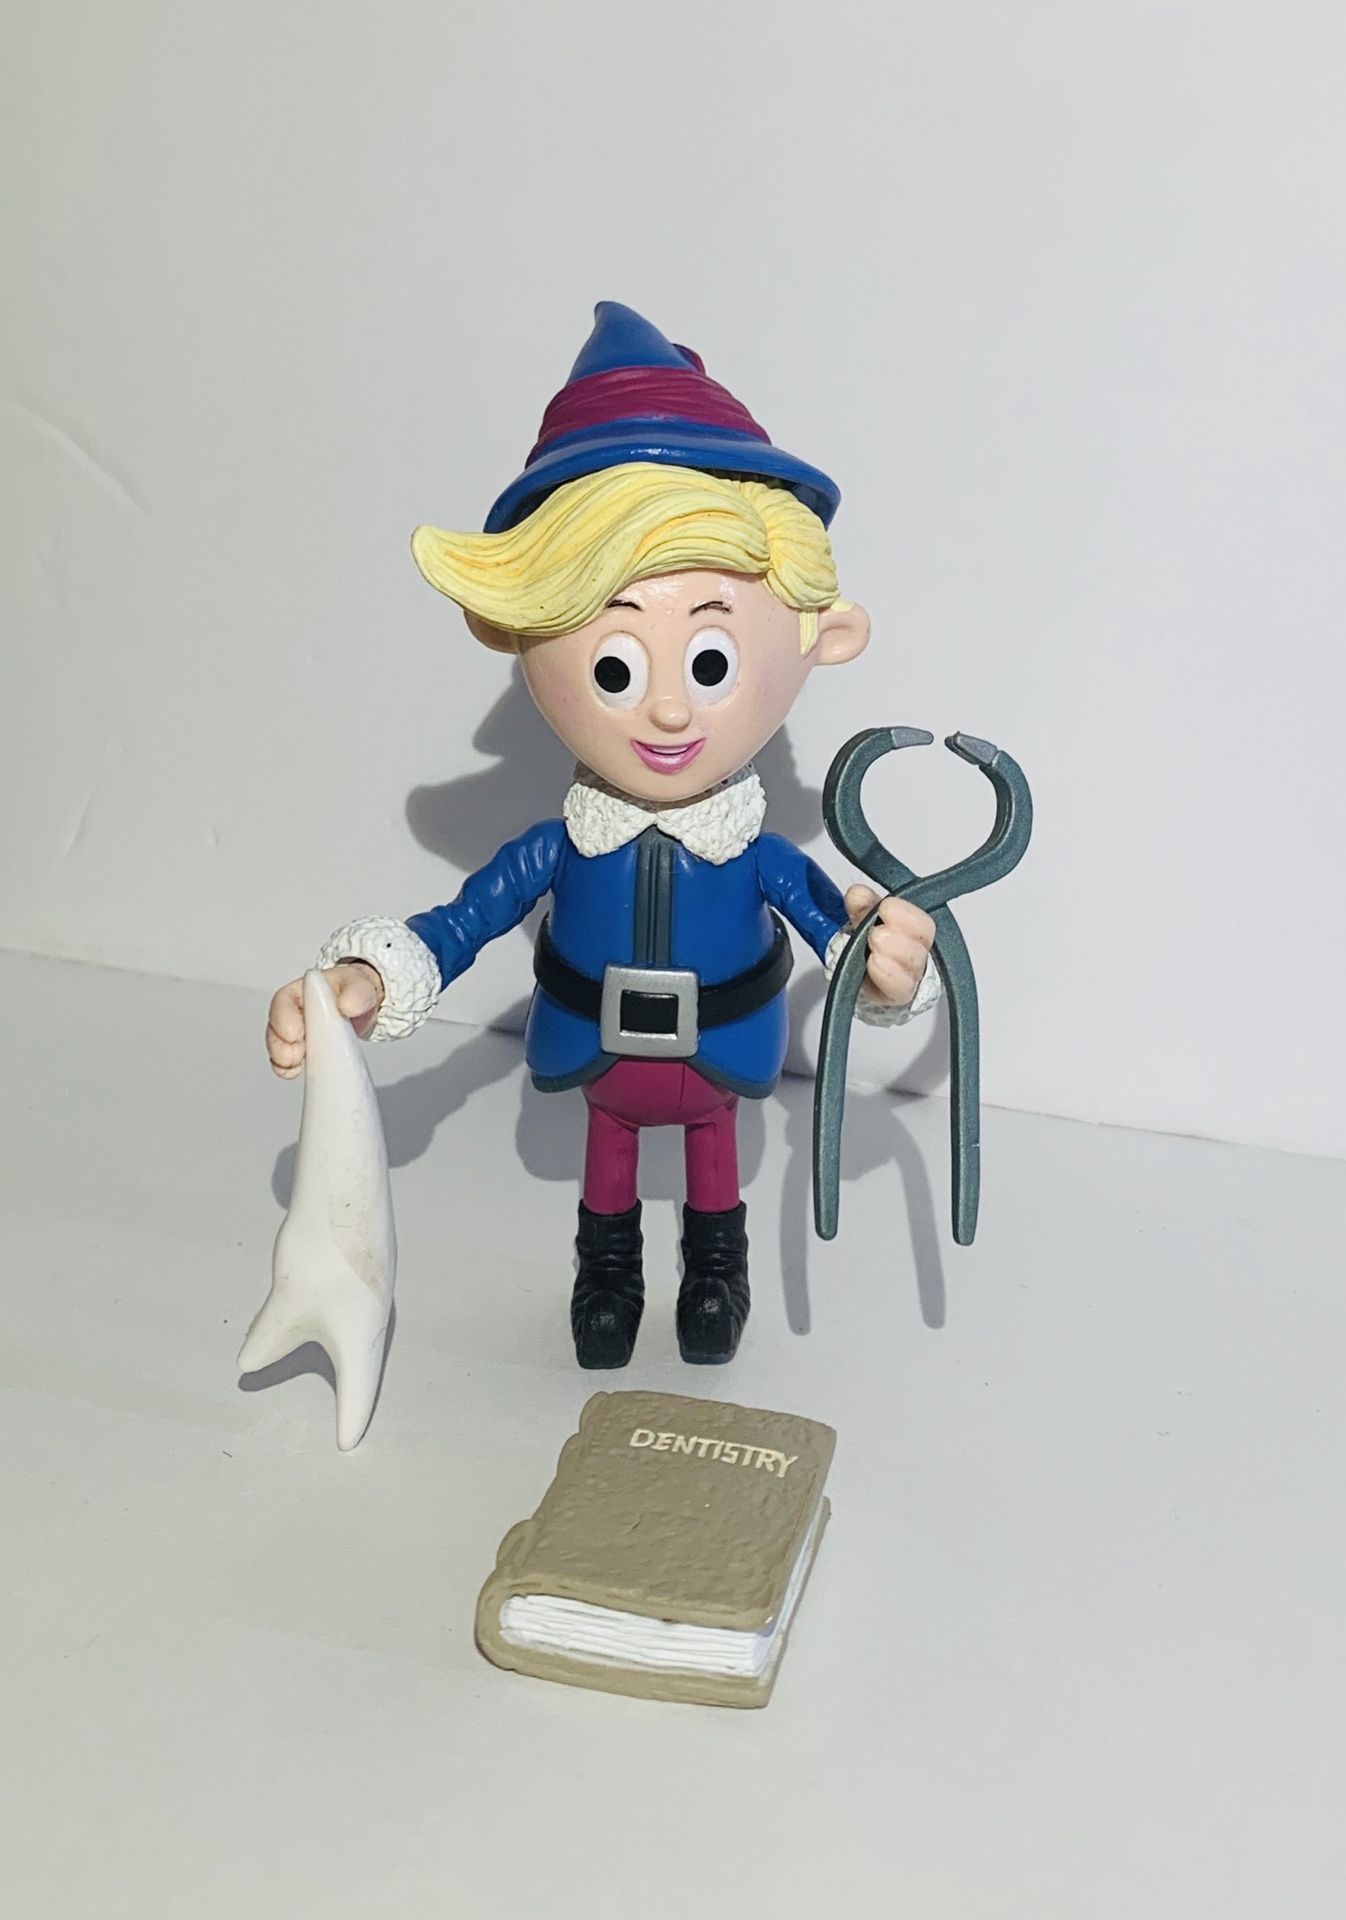 The Island of Misfit Toys - Hermey the Elf